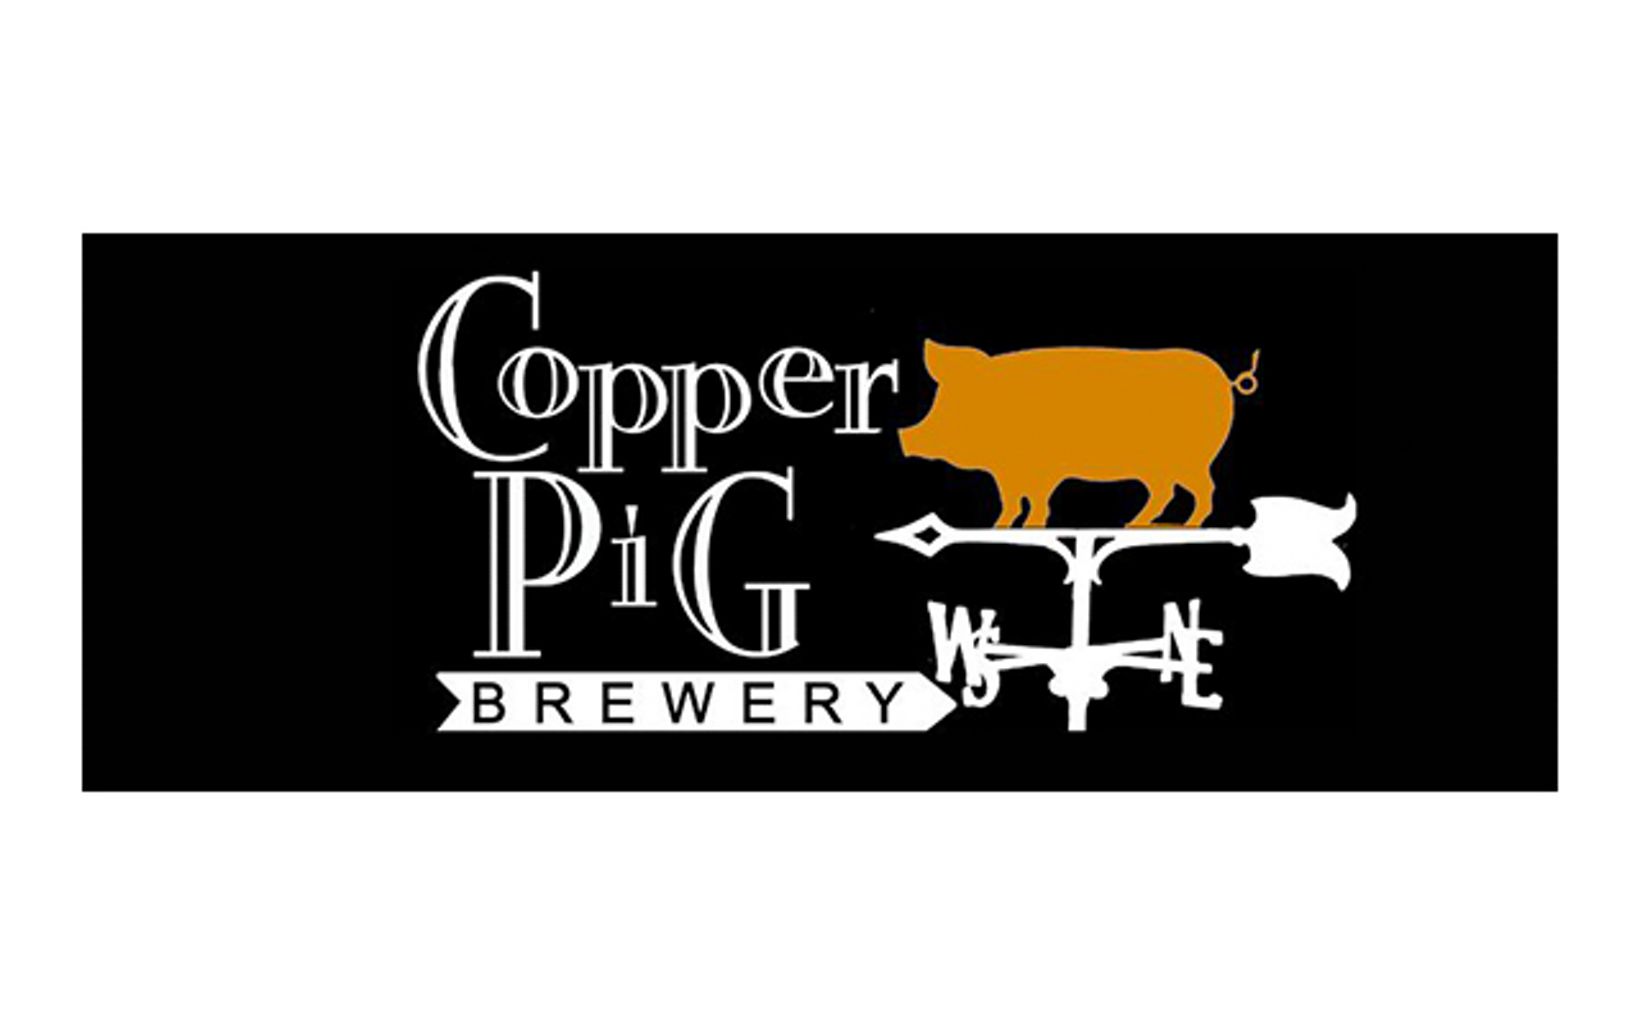 The Copper Pig Brewery Logo.